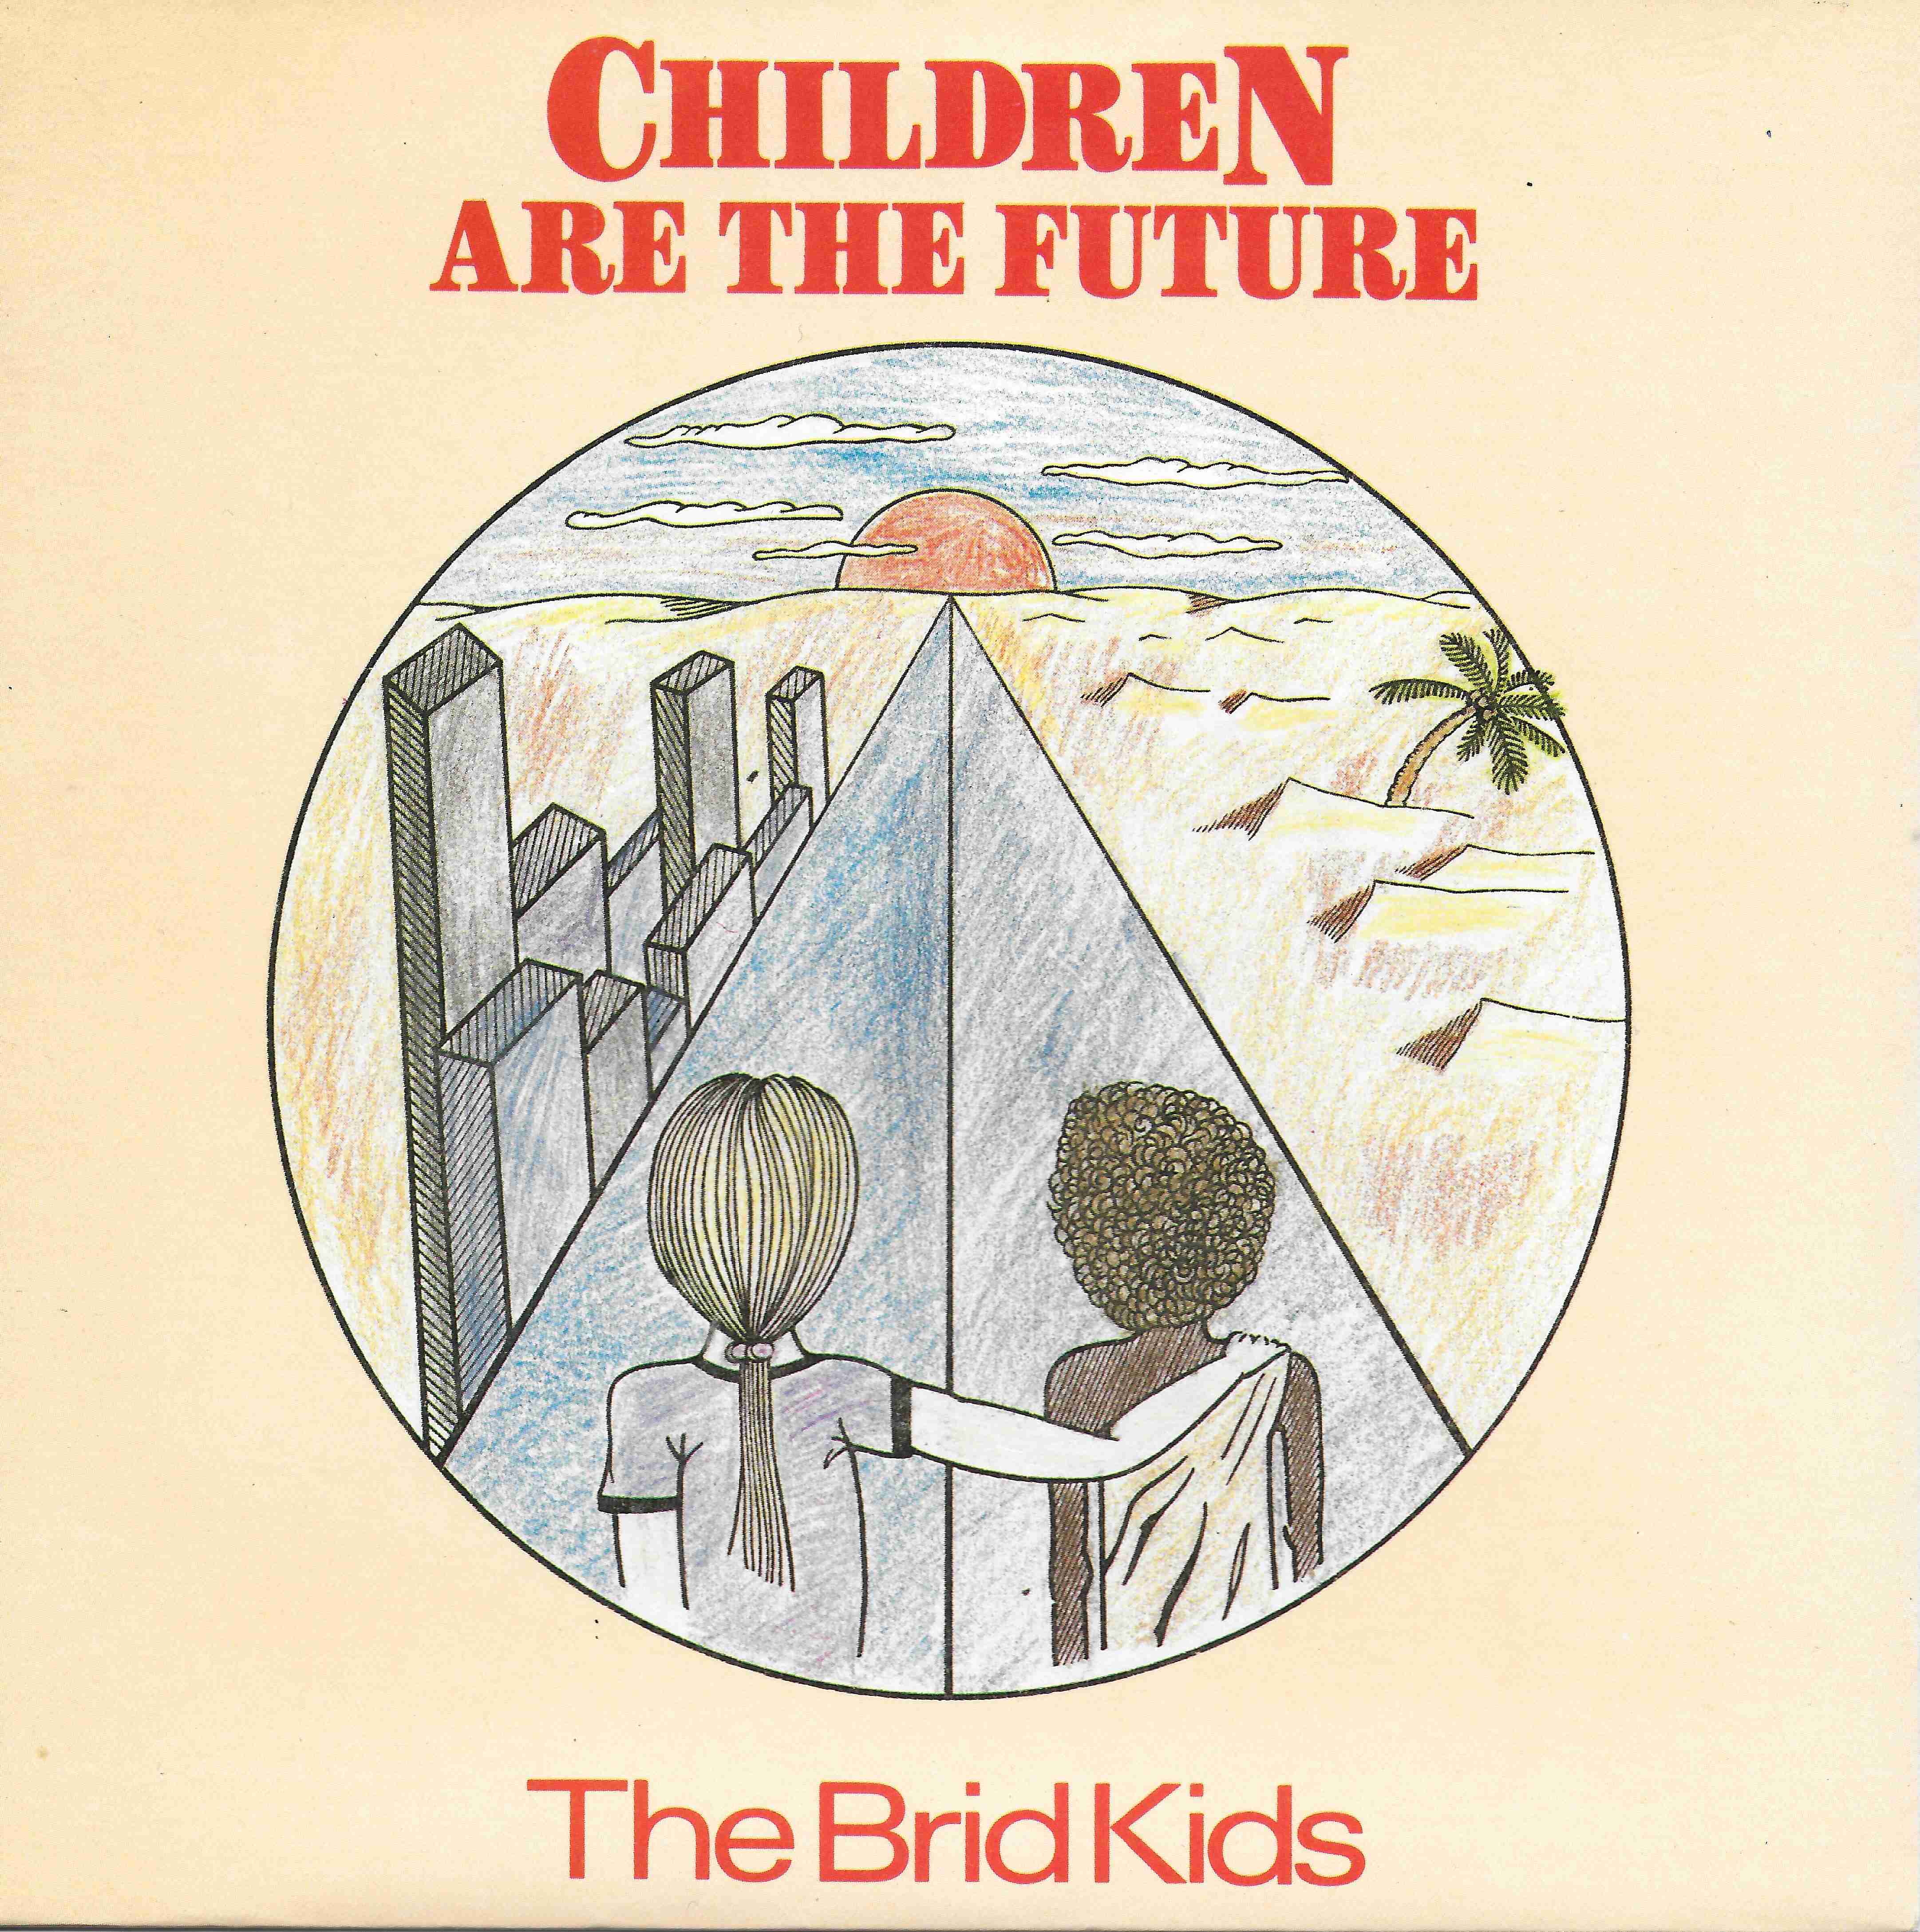 Picture of RESL 232 Children are the future by artist The Brid Kids from the BBC records and Tapes library